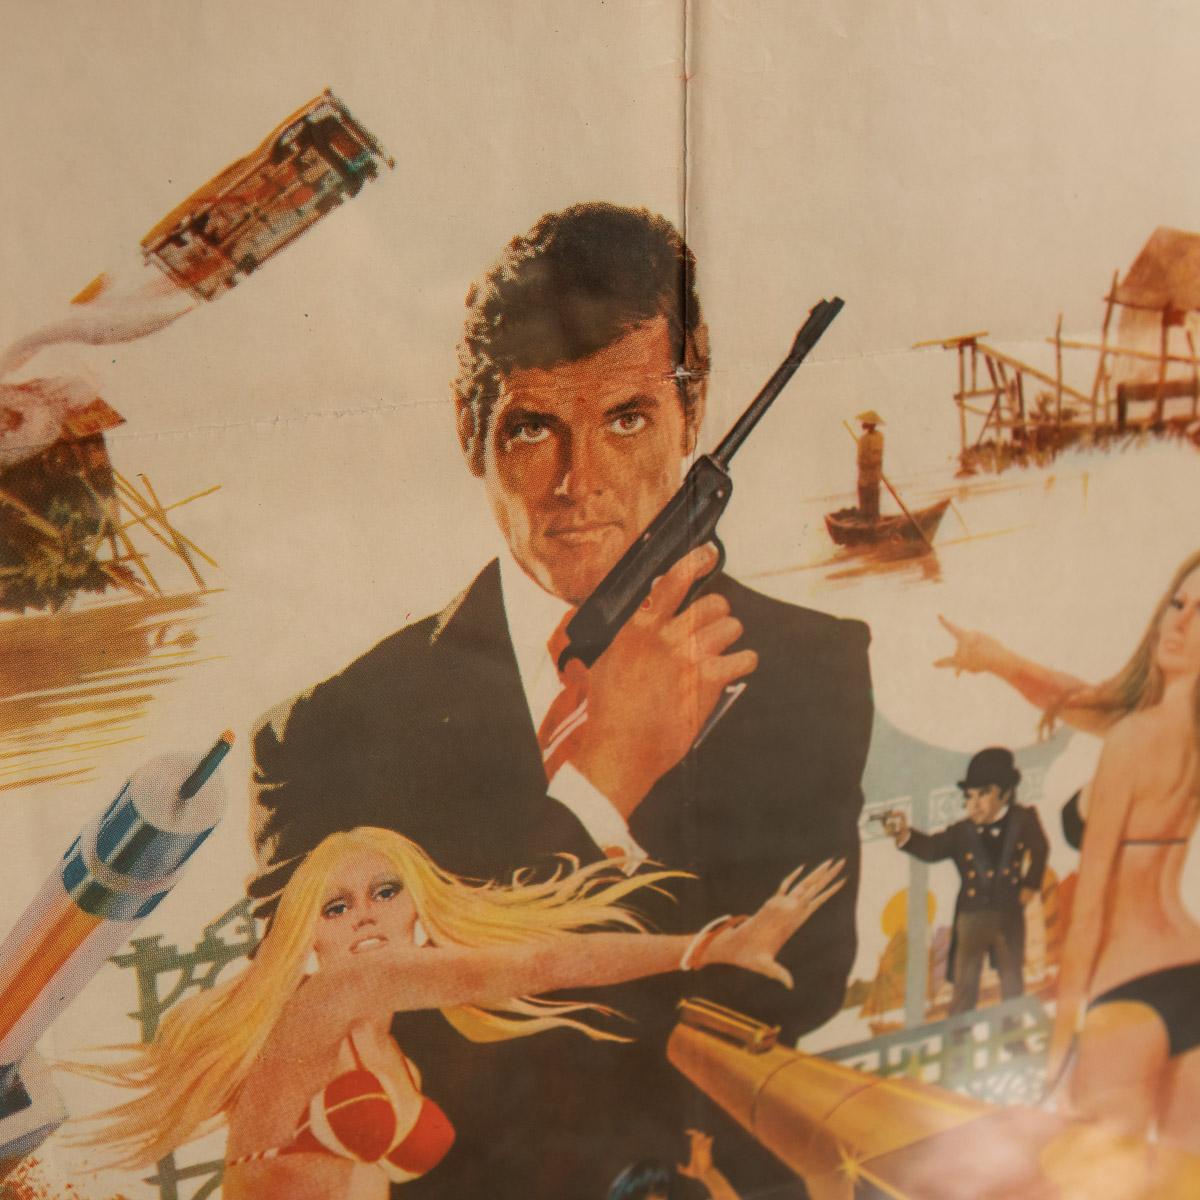 A very rare and original Argentinian release poster from the 1974 'Man with The Golden Gun'. This was the ninth film in the series produced by Eon Productions. It was the second time that Roger Moore played James Bond, and the fourth and final time